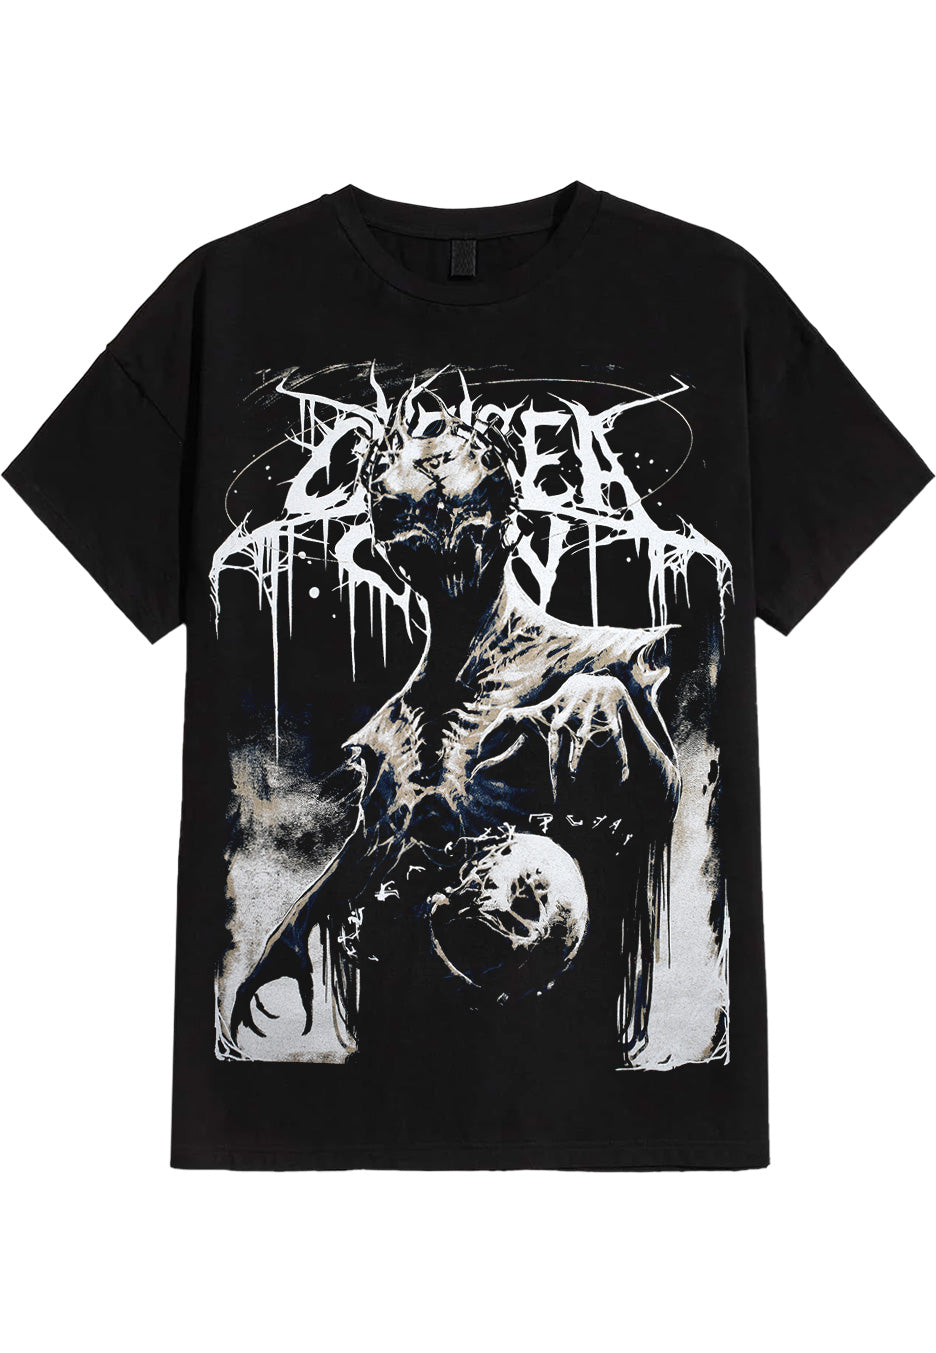 Chelsea Grin - Leave With Us - T-Shirt | Neutral-Image